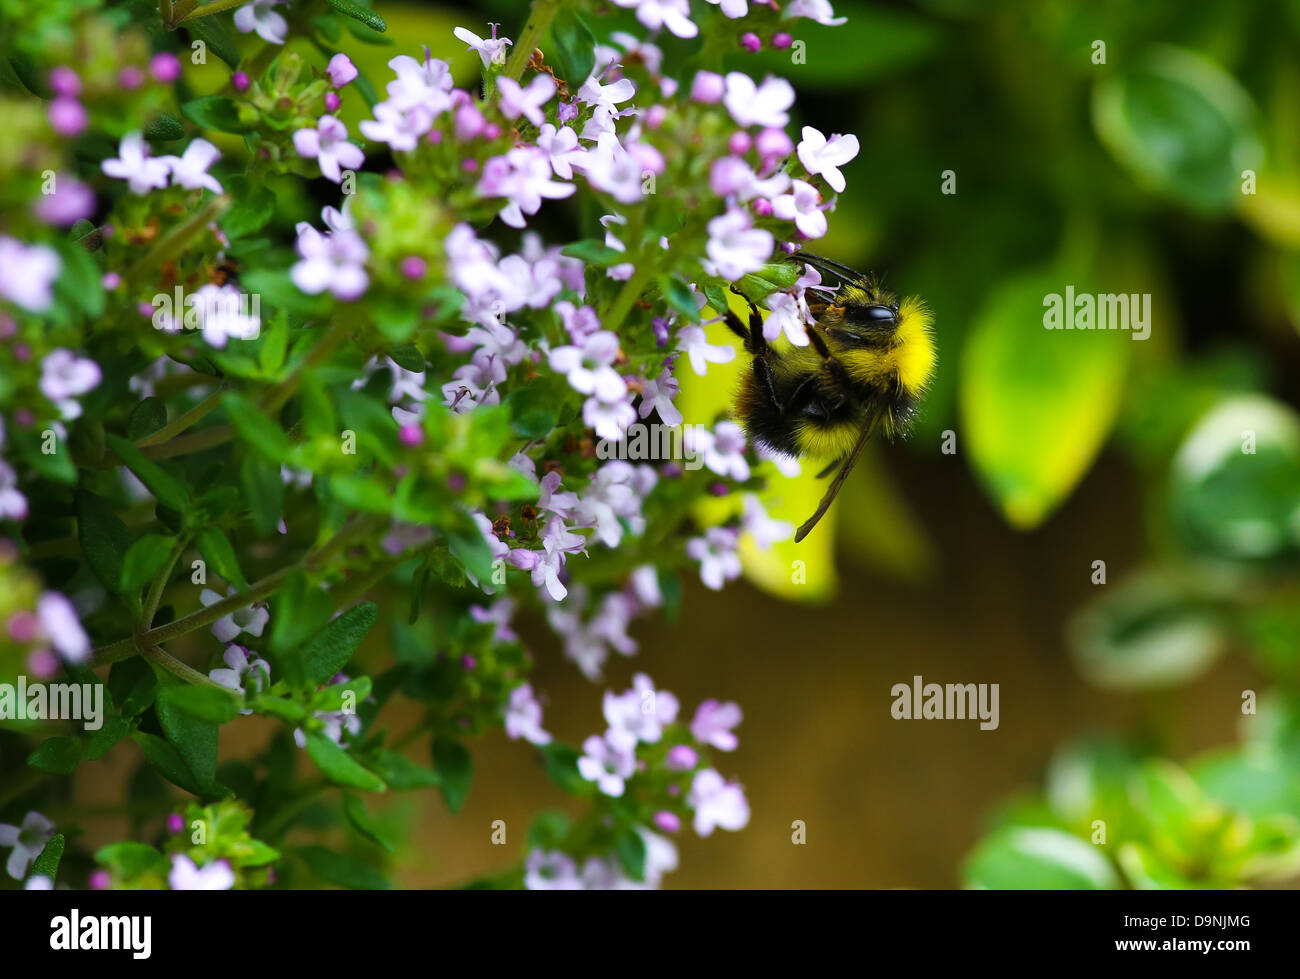 Bumble Bee pollinating the Creeping Thyme Stock Photo - Alamy